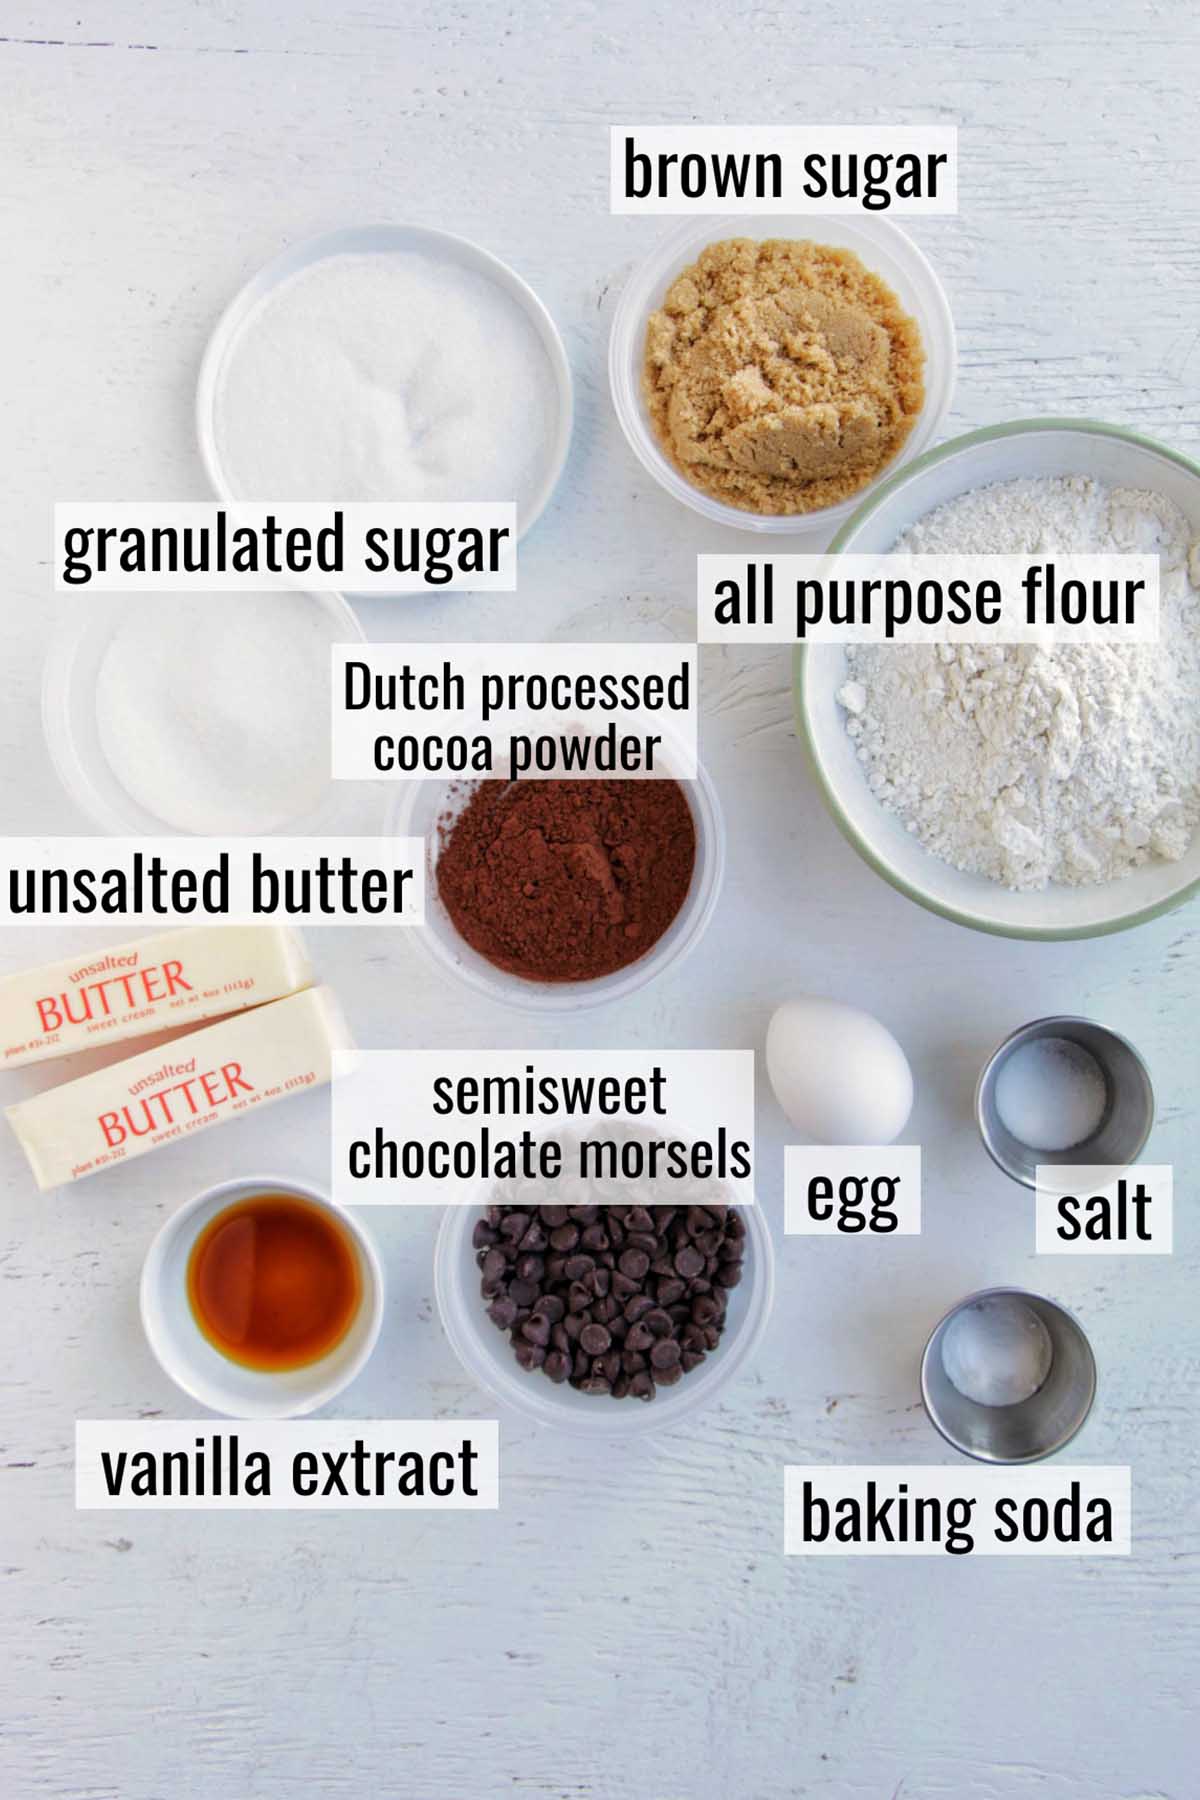 thumbprint chocolate filled cookie ingredients with labels.